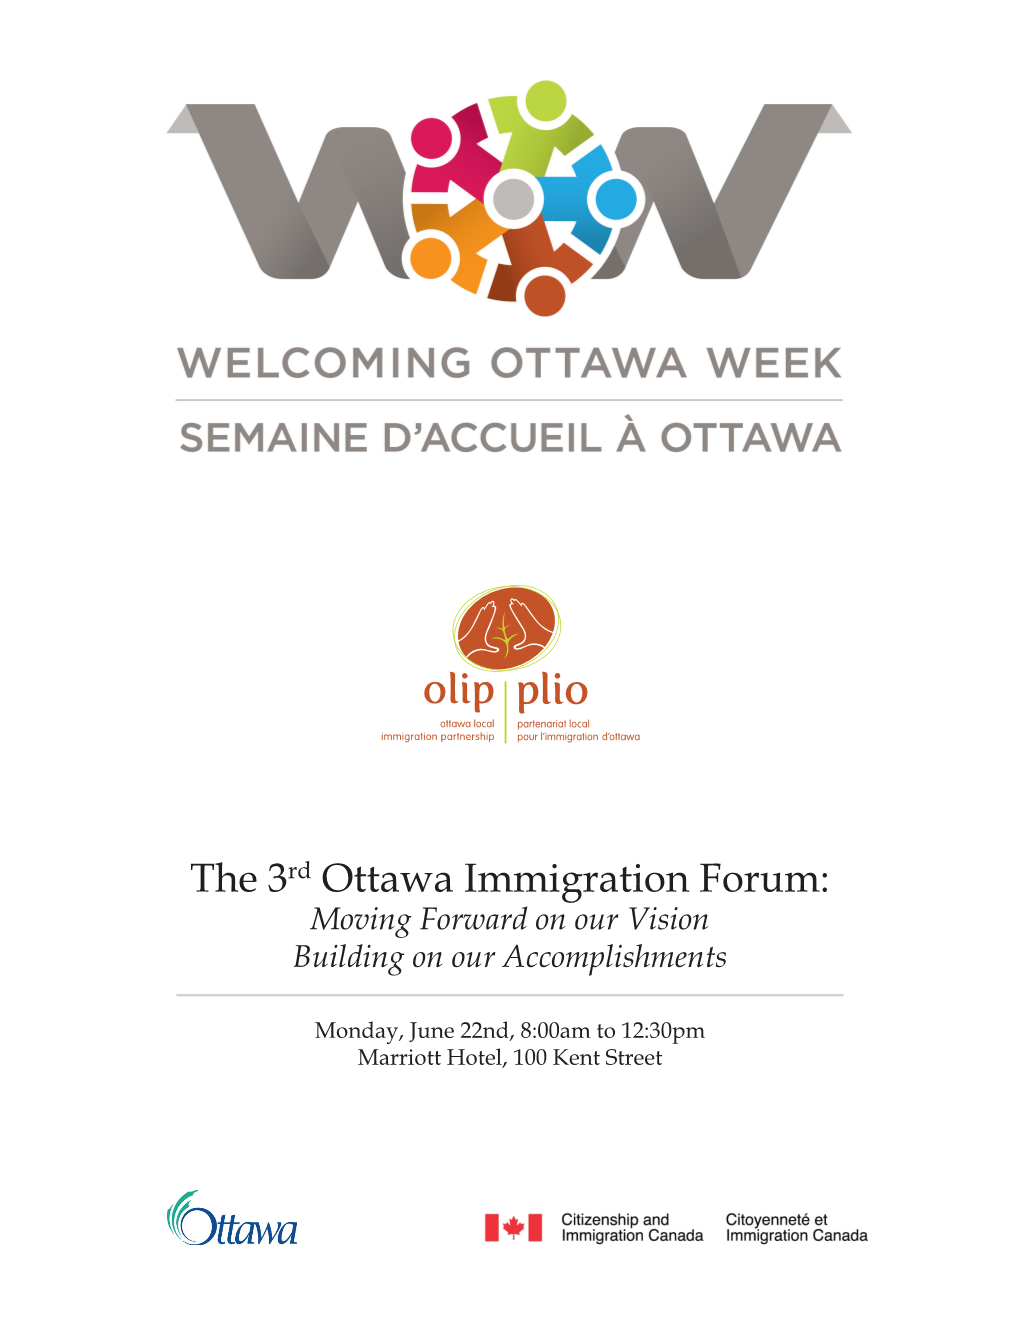 The 3Rd Ottawa Immigration Forum: Moving Forward on Our Vision Building on Our Accomplishments